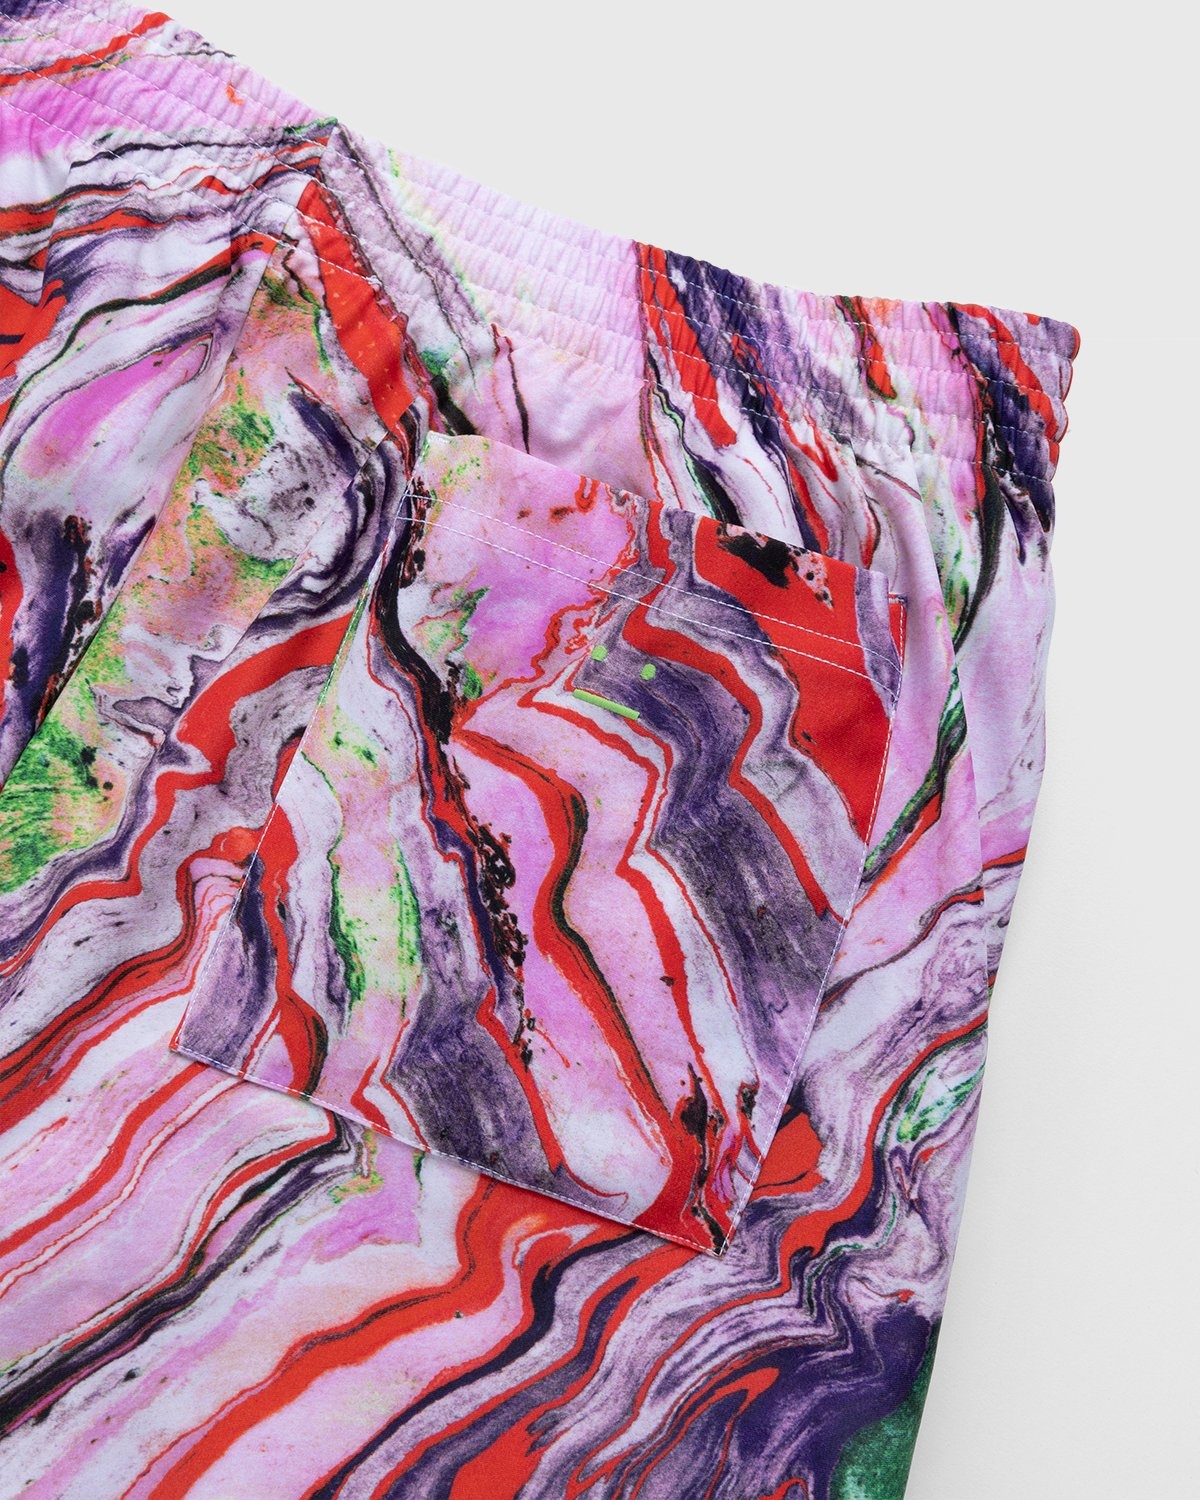 Acne Studios – Marble Swim Shorts Neon Red - Shorts - Red - Image 5